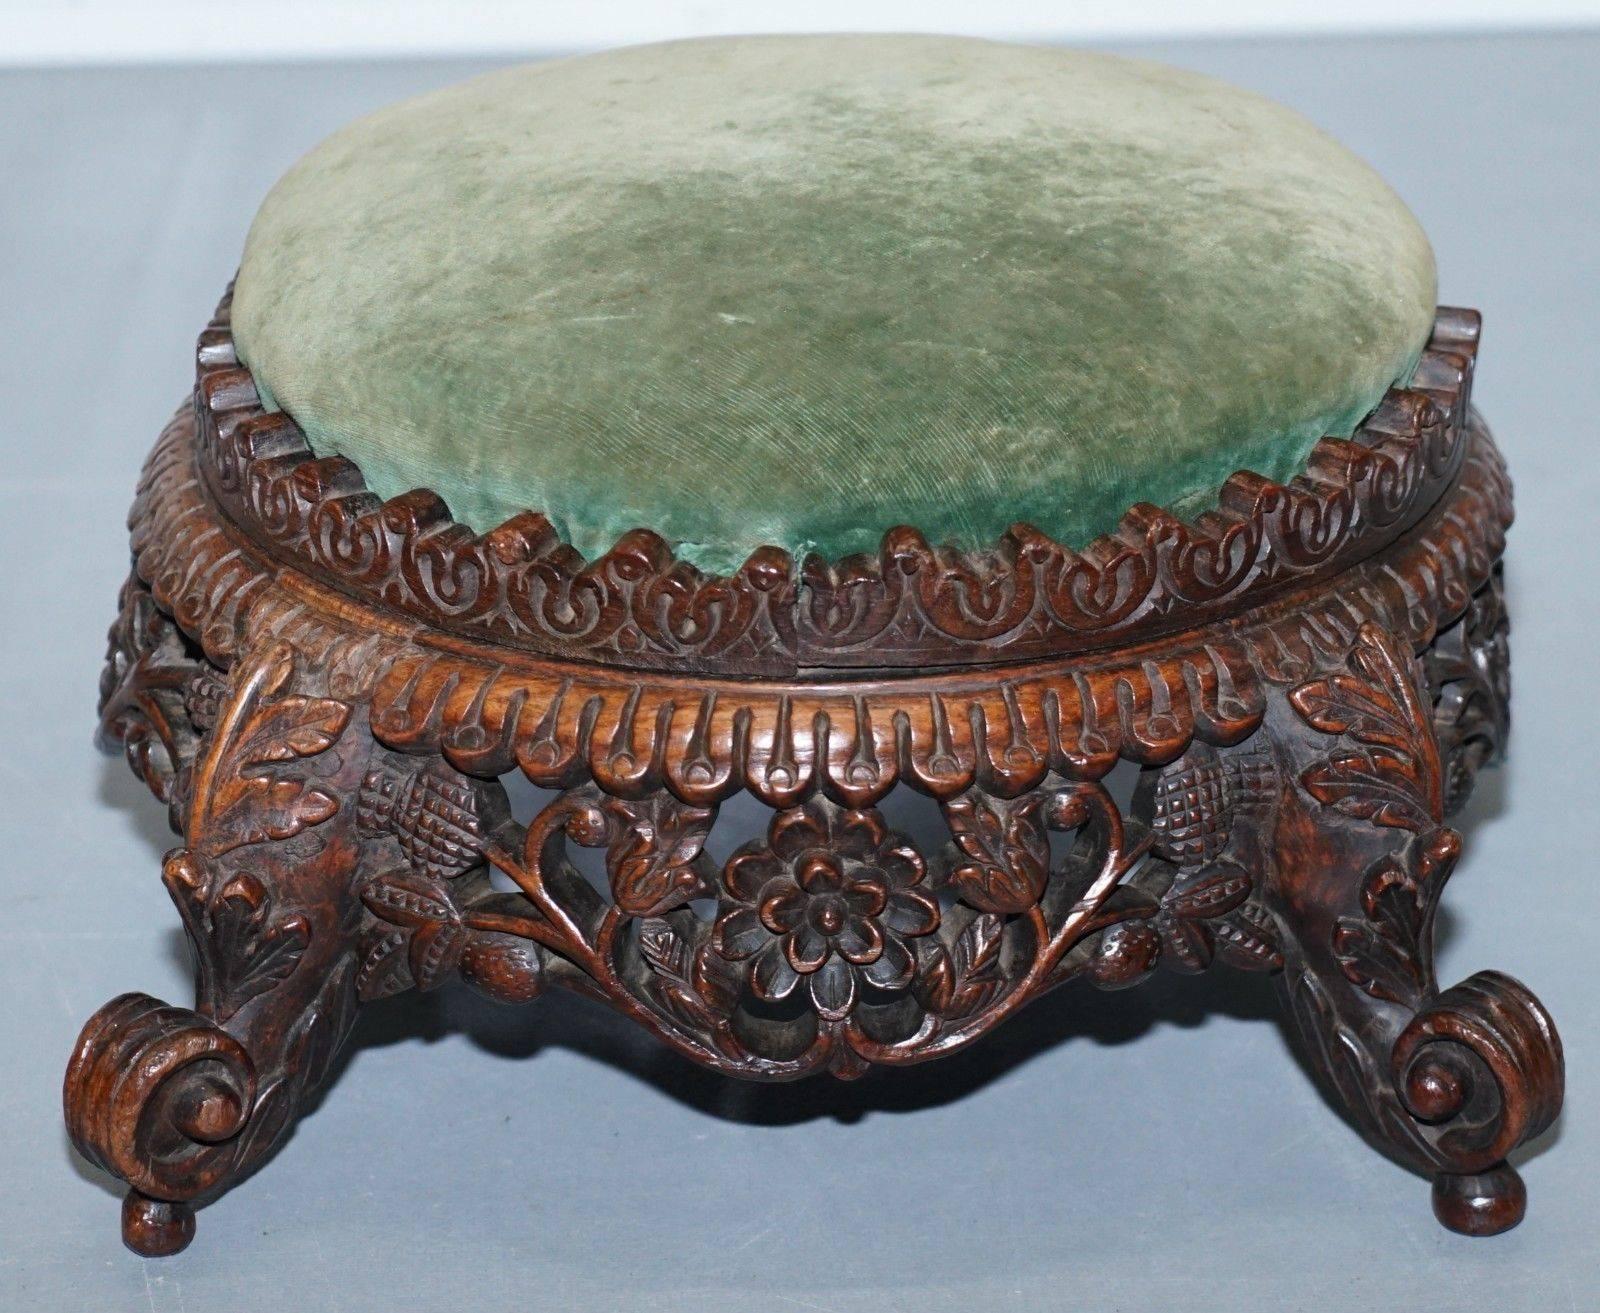 We are delighted to offer for sale this a very good looking and well-made stool from 19th century Burma

A rare find, the fretwork carving is a work of art, the timber is all hand sawn, the legs are as sculptural as they come

In terms of